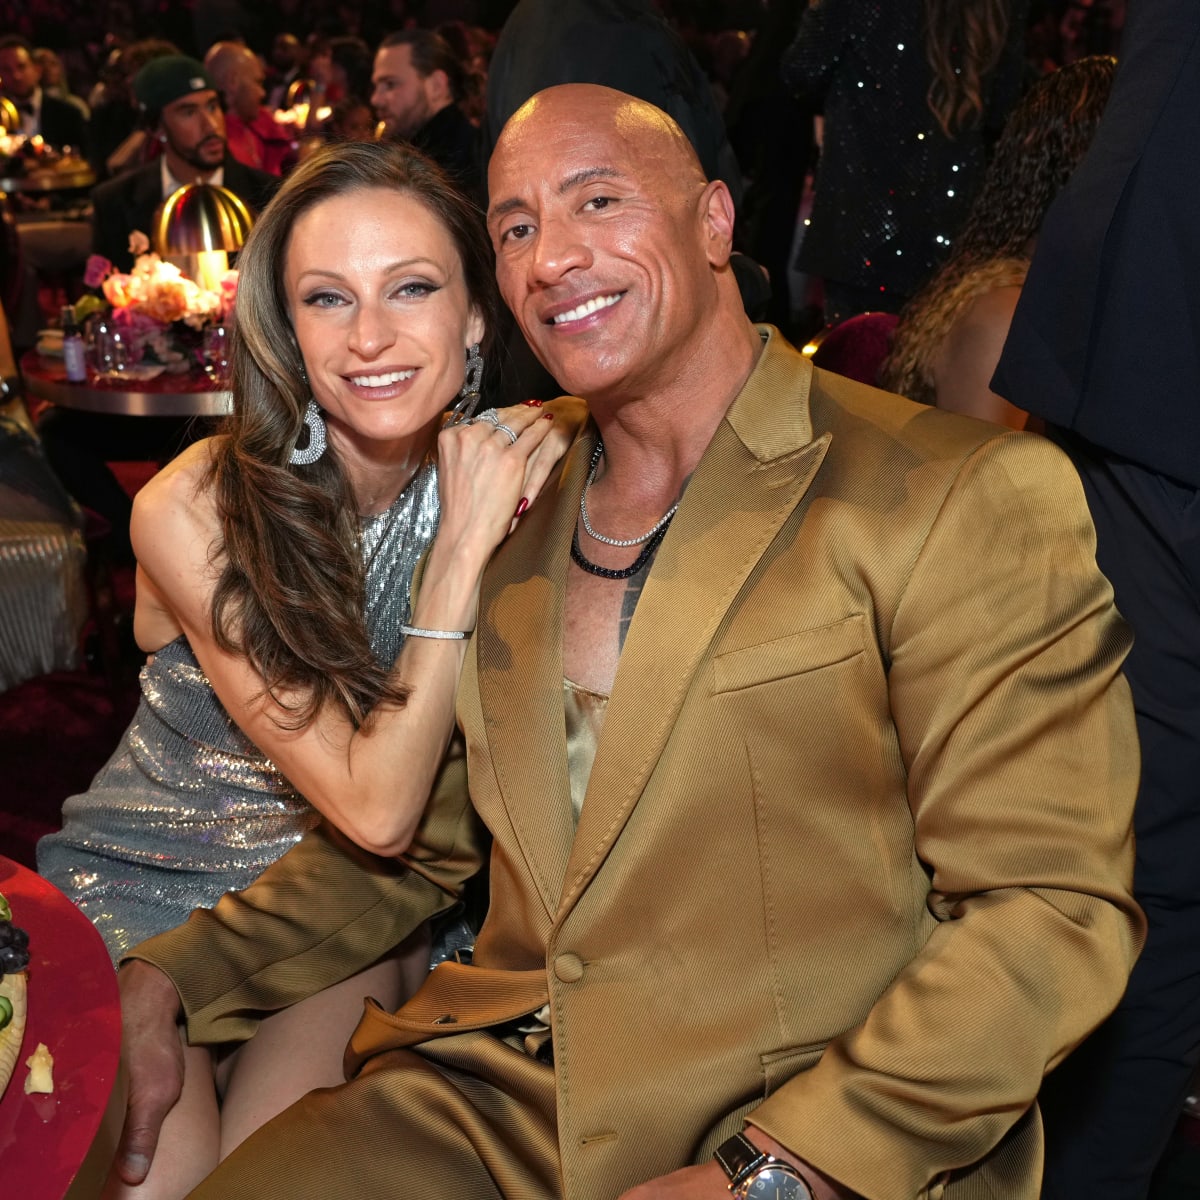 Inside Look How Dwayne 'The Rock' Johnson Found True Love with Lauren Hashian After a Decade Together--